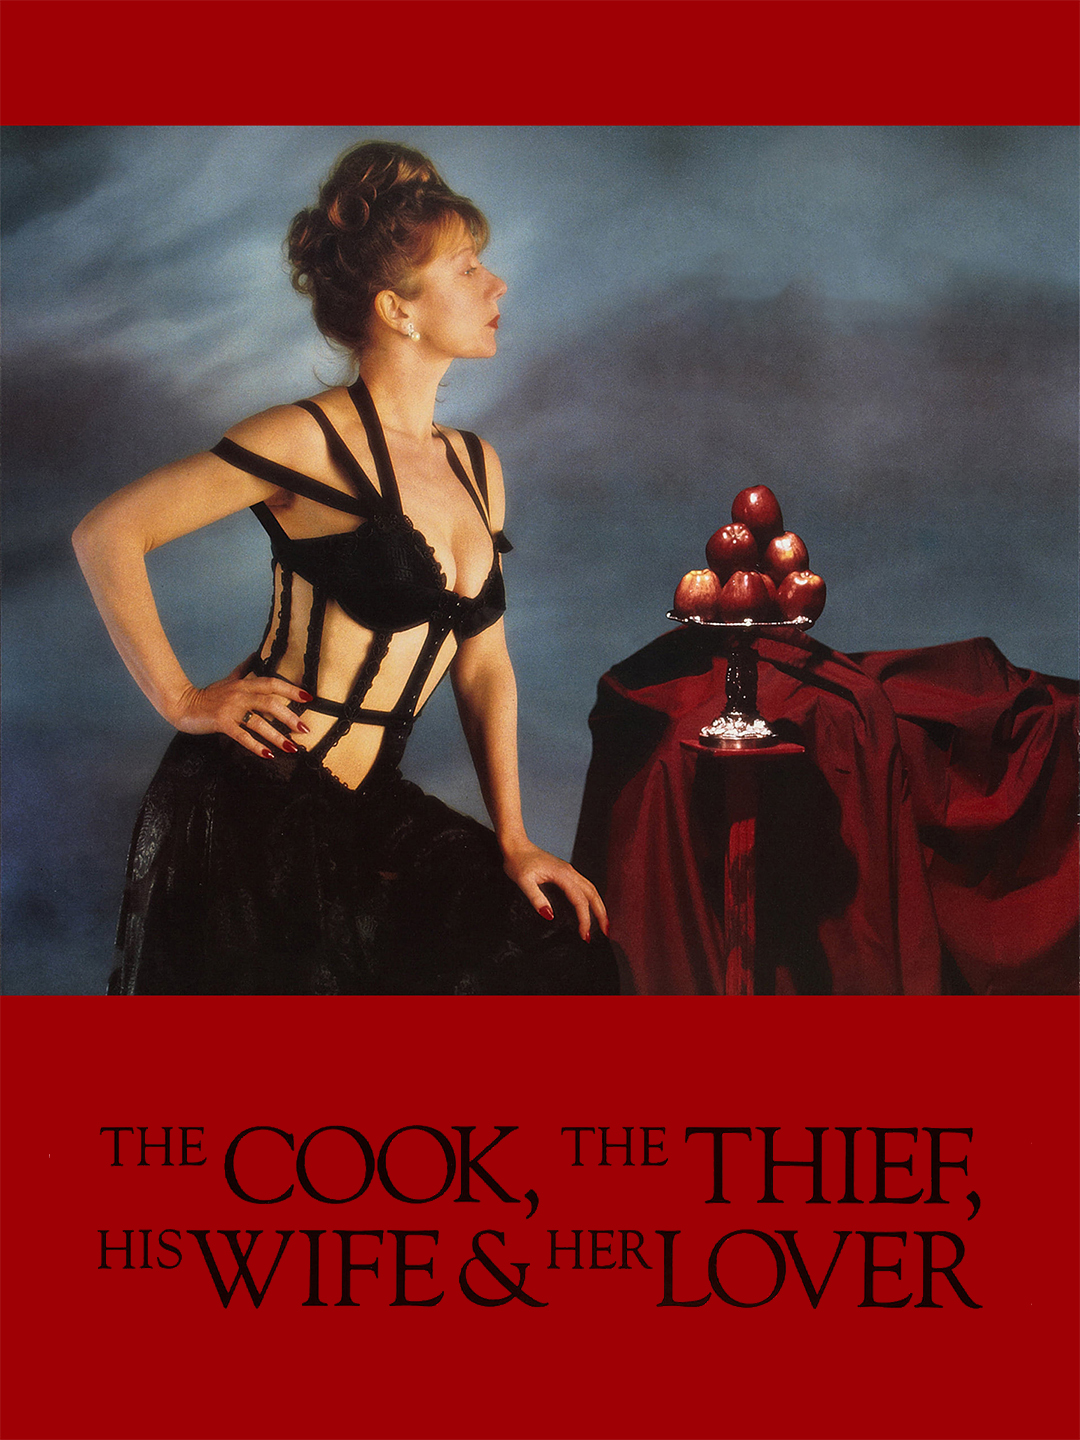 The Cook, the Thief, His Wife and Her Lover pic